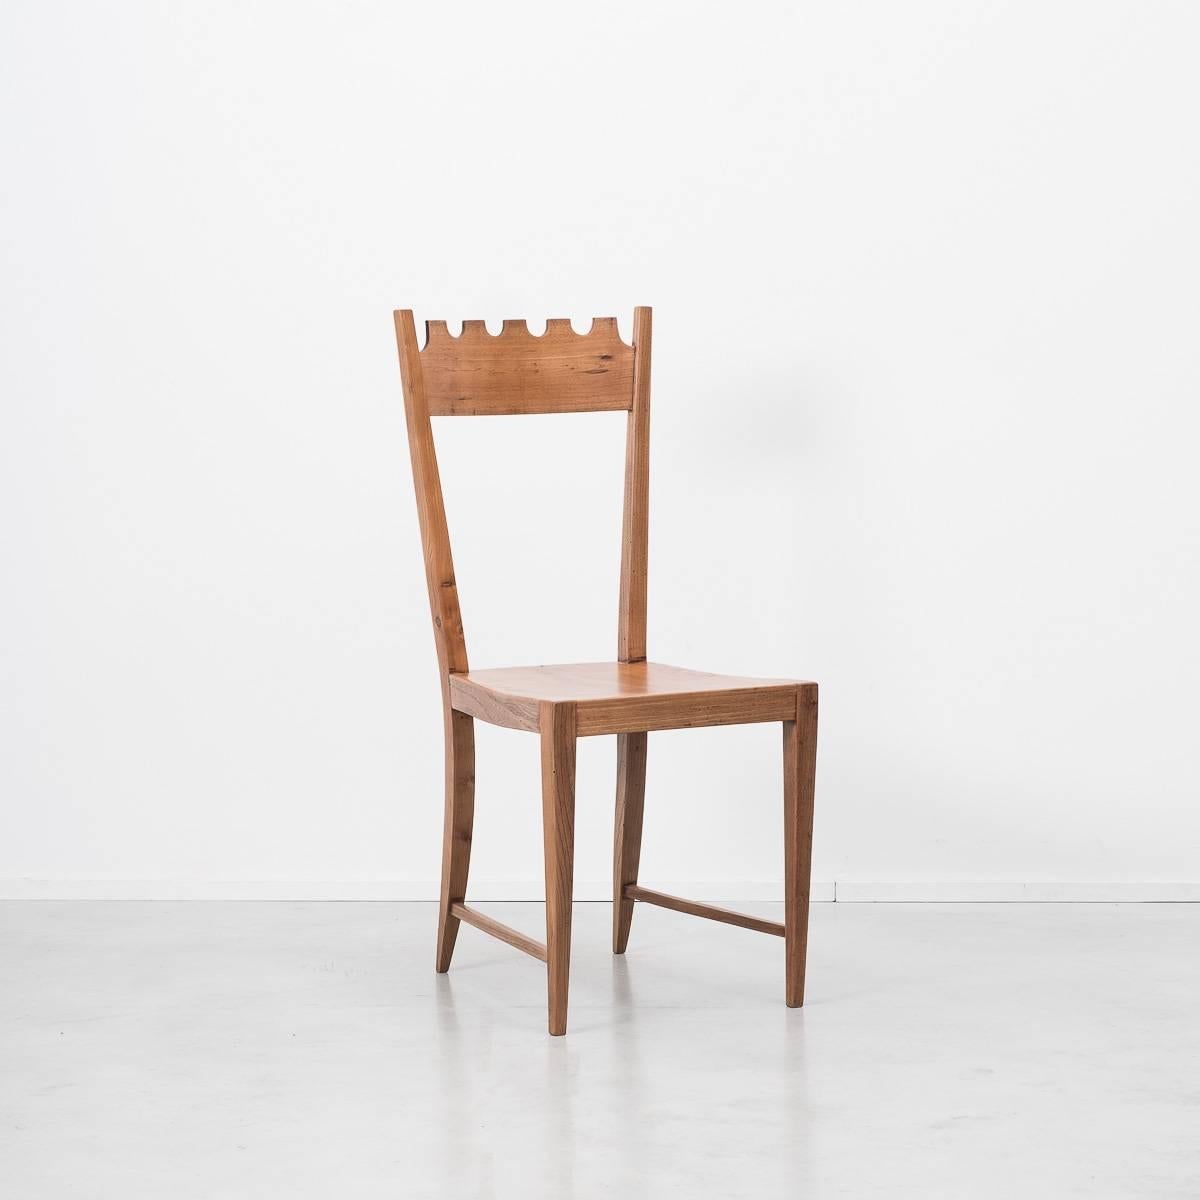 A lovely set of 12 wooden Paolo Buffa attributed dining chairs. After working briefly in Gio Ponti’s studio in the 1920s, Buffa (1903-1970) made a name for himself amongst the Milanese upper classes. His designs were original – combining